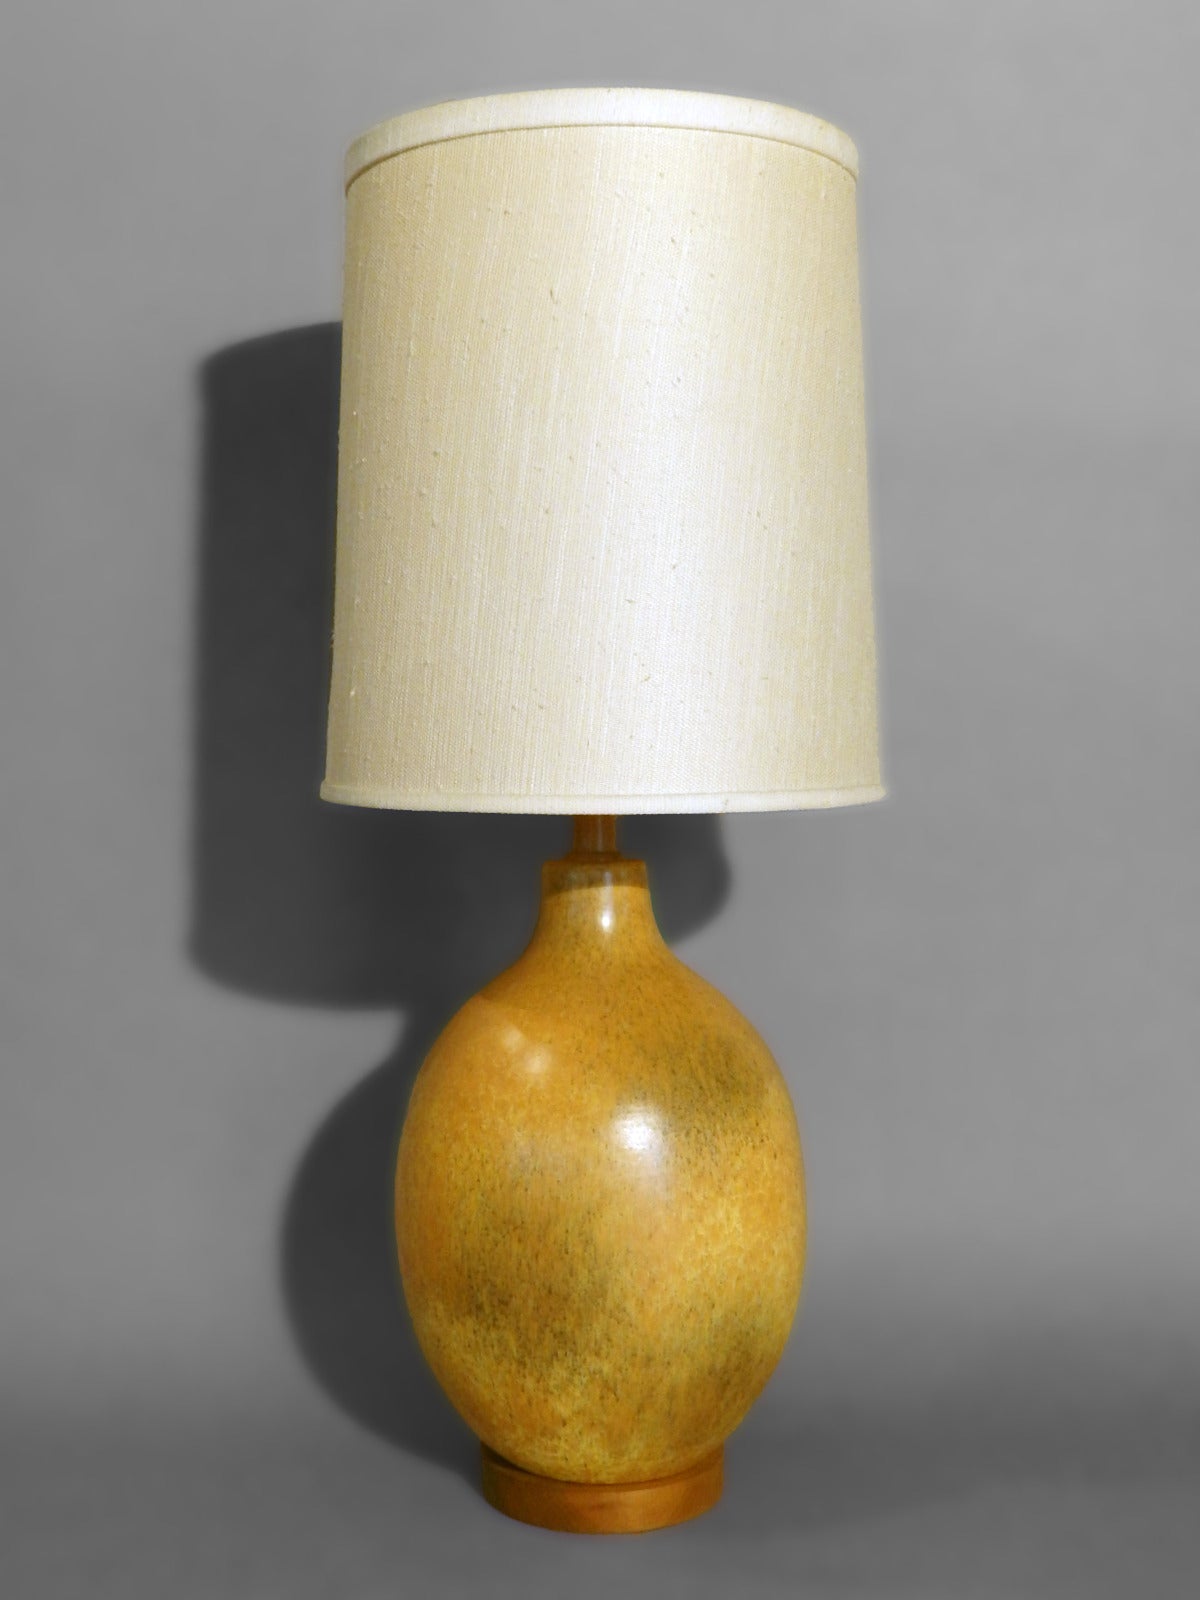 Nicely Glazed Large Warm Tone Table Lamp in the Style of Design Technics . Overall height is 38